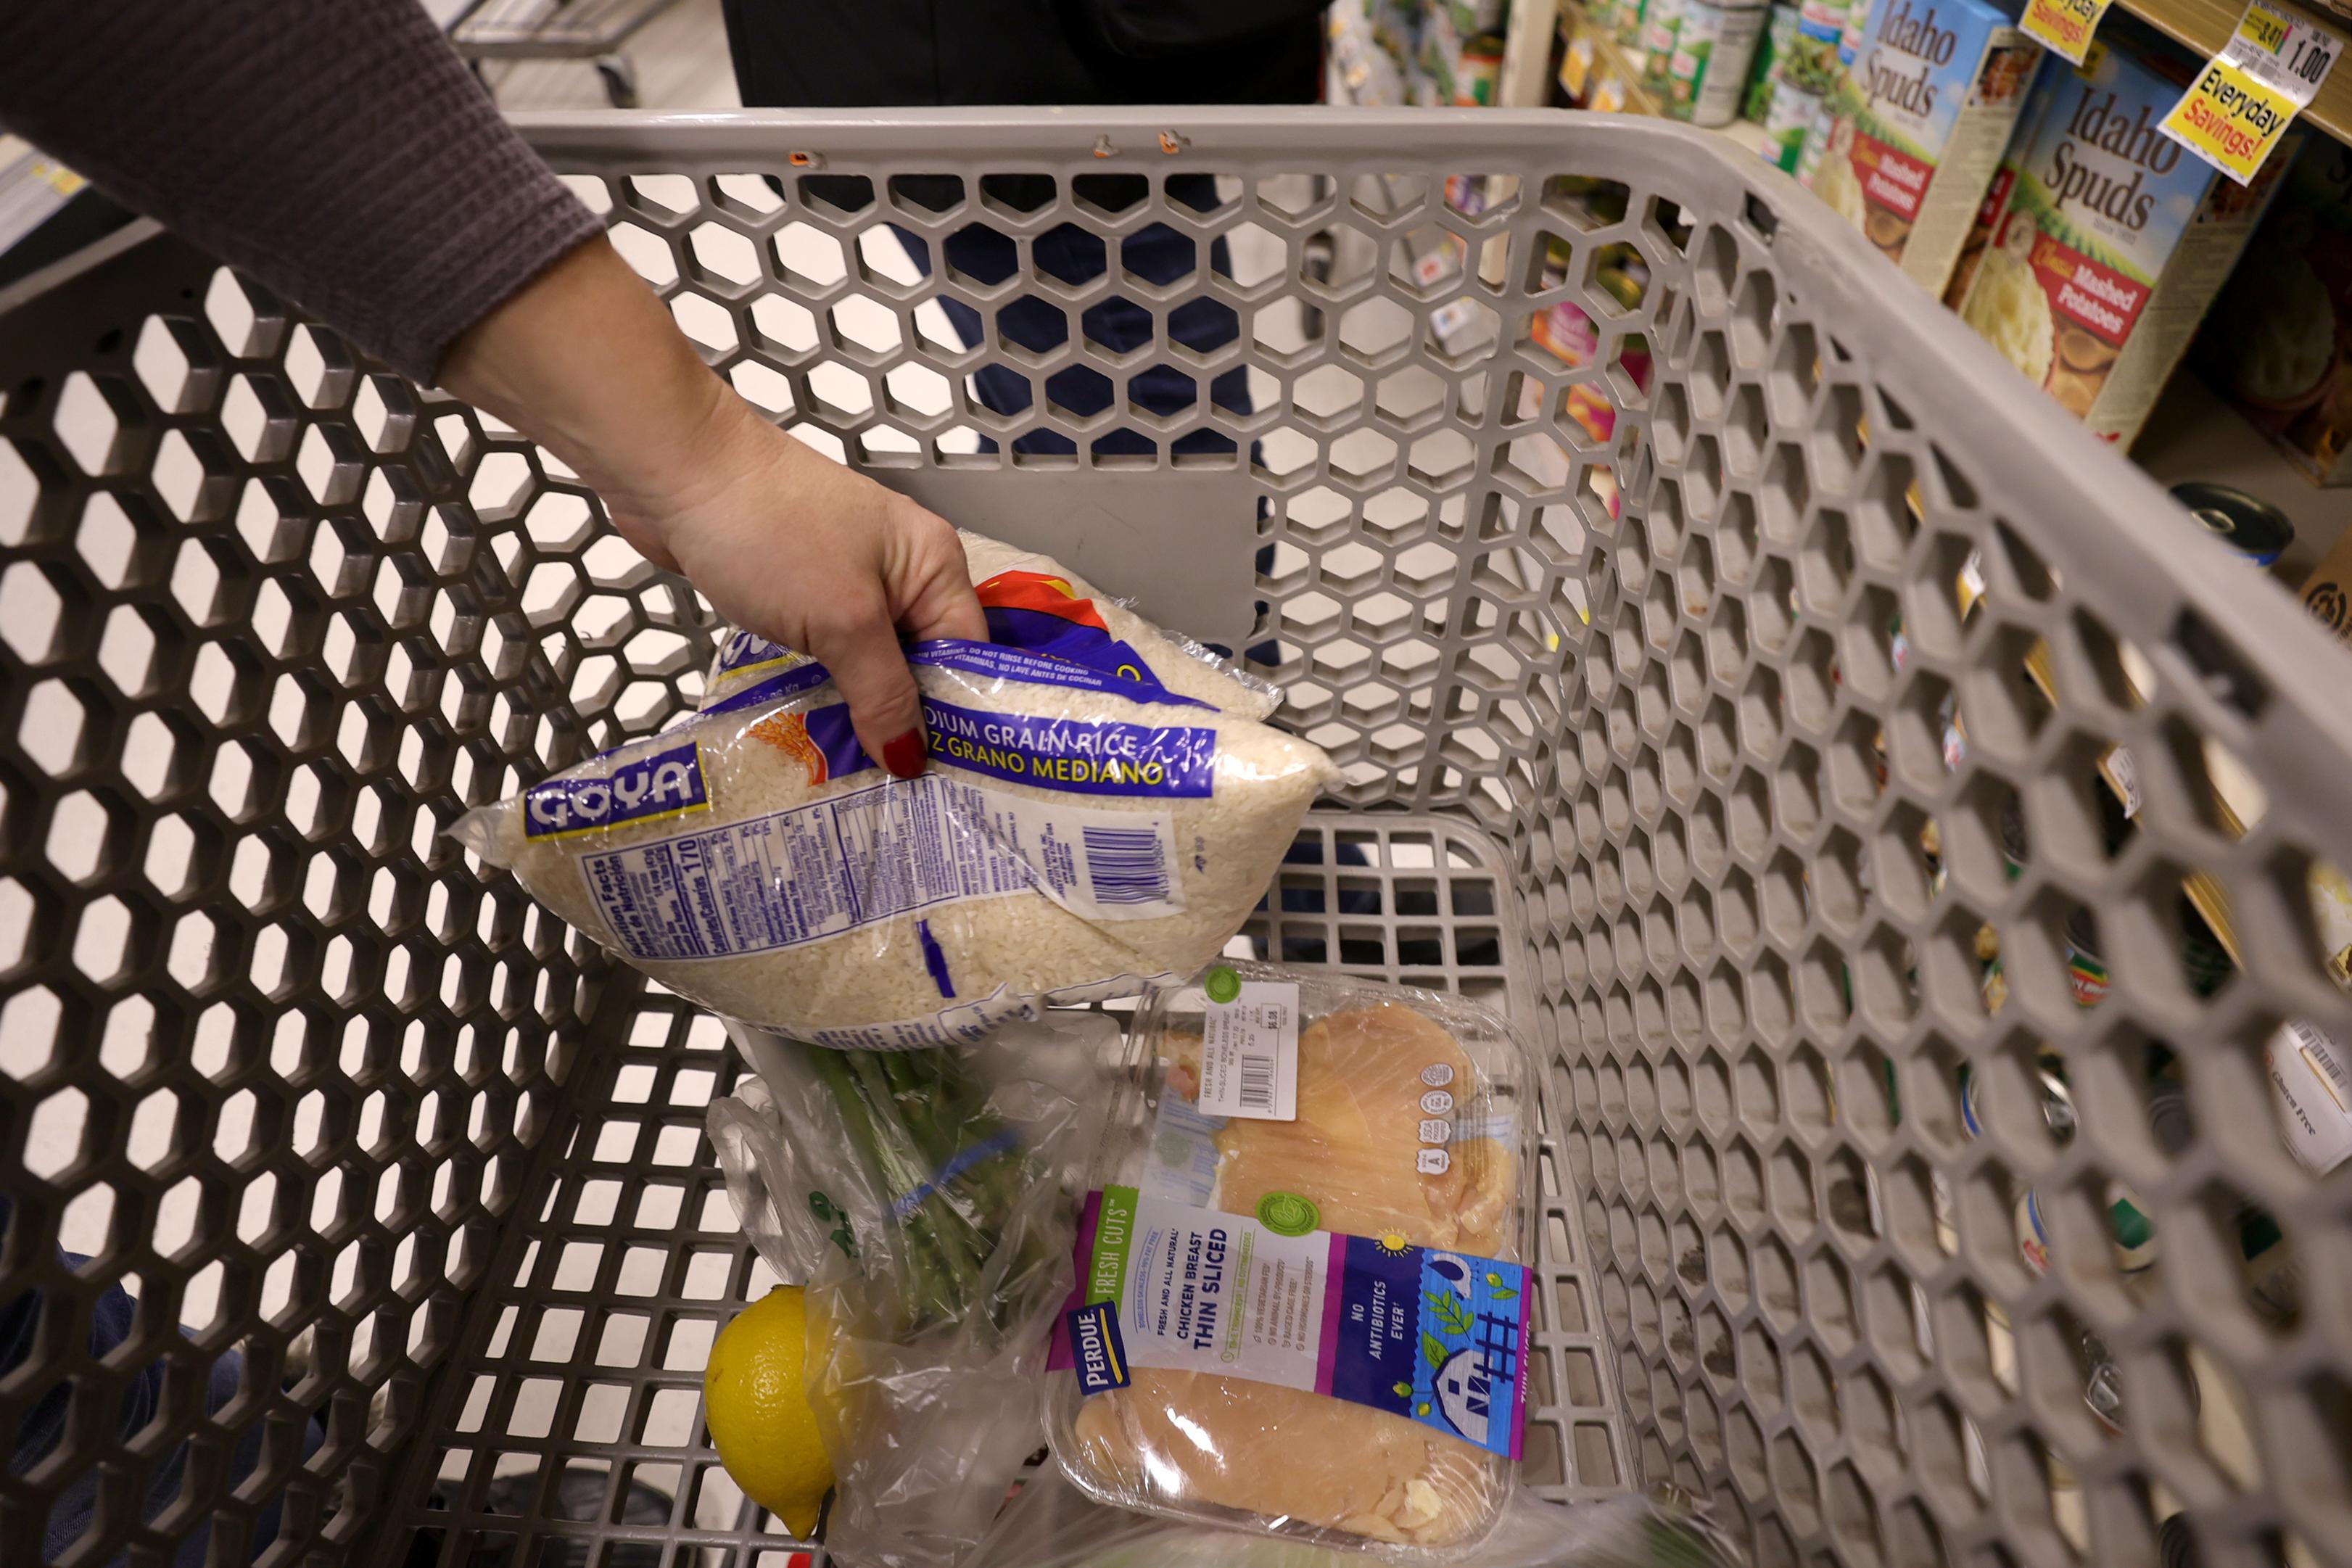 A hand putting a bag of rice into a grocery cart that already contains a lemon and a pack of chicken thighs